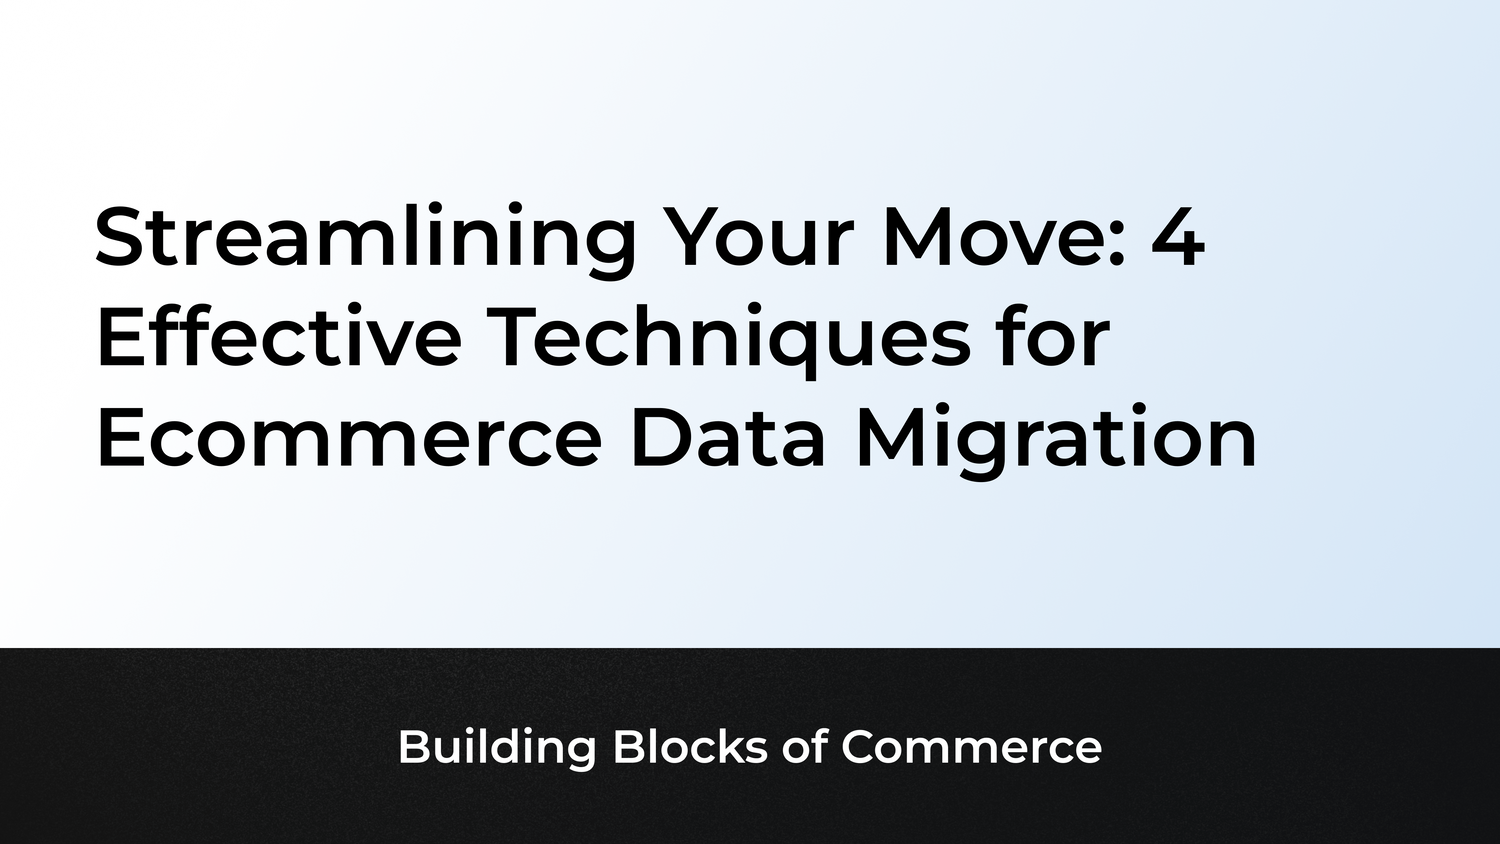 Streamlining Your Move: 4 Effective Techniques for Ecommerce Data Migration